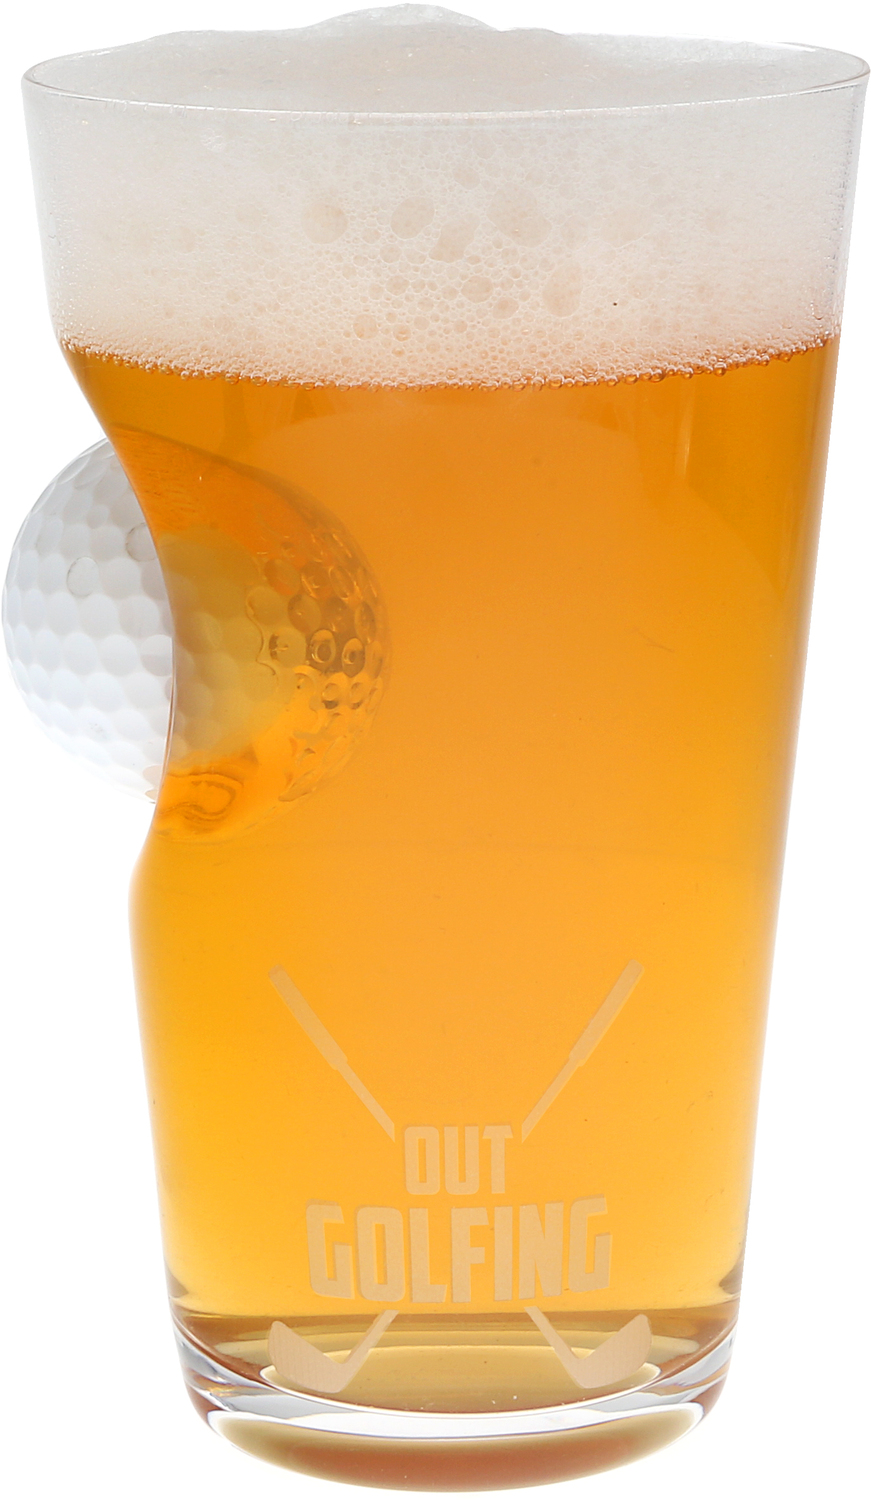 Out Golfing by Man Out - Out Golfing - 15 oz Golf Ball Glass